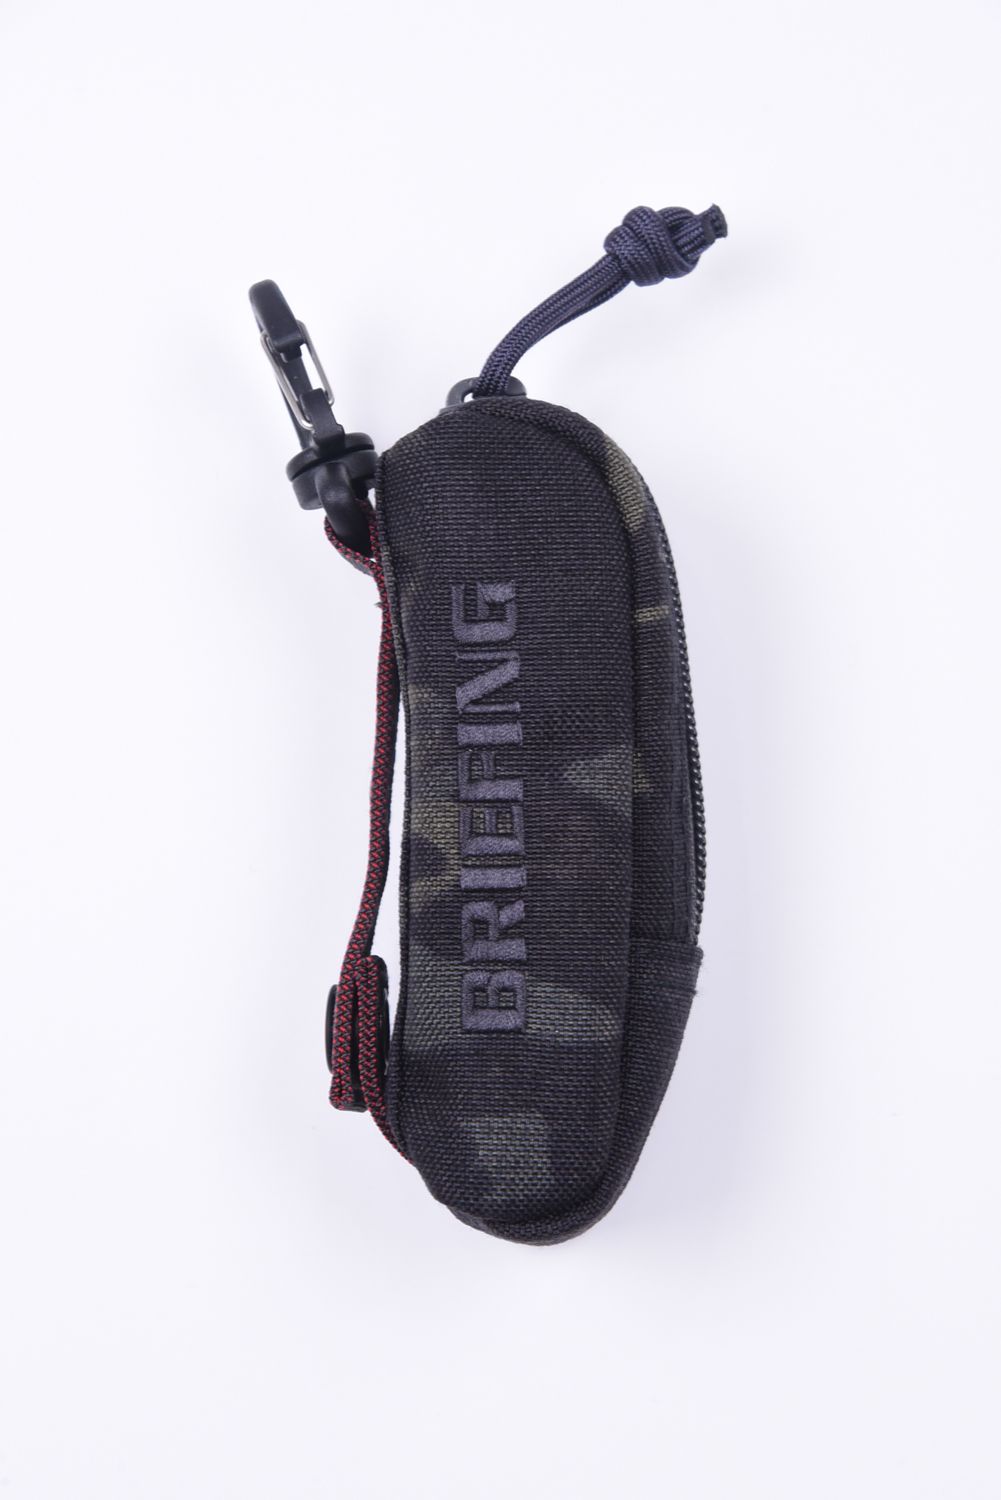 BRIEFING - 【STANDARD SERIES】 BALL POUCH 1000D / ボール 